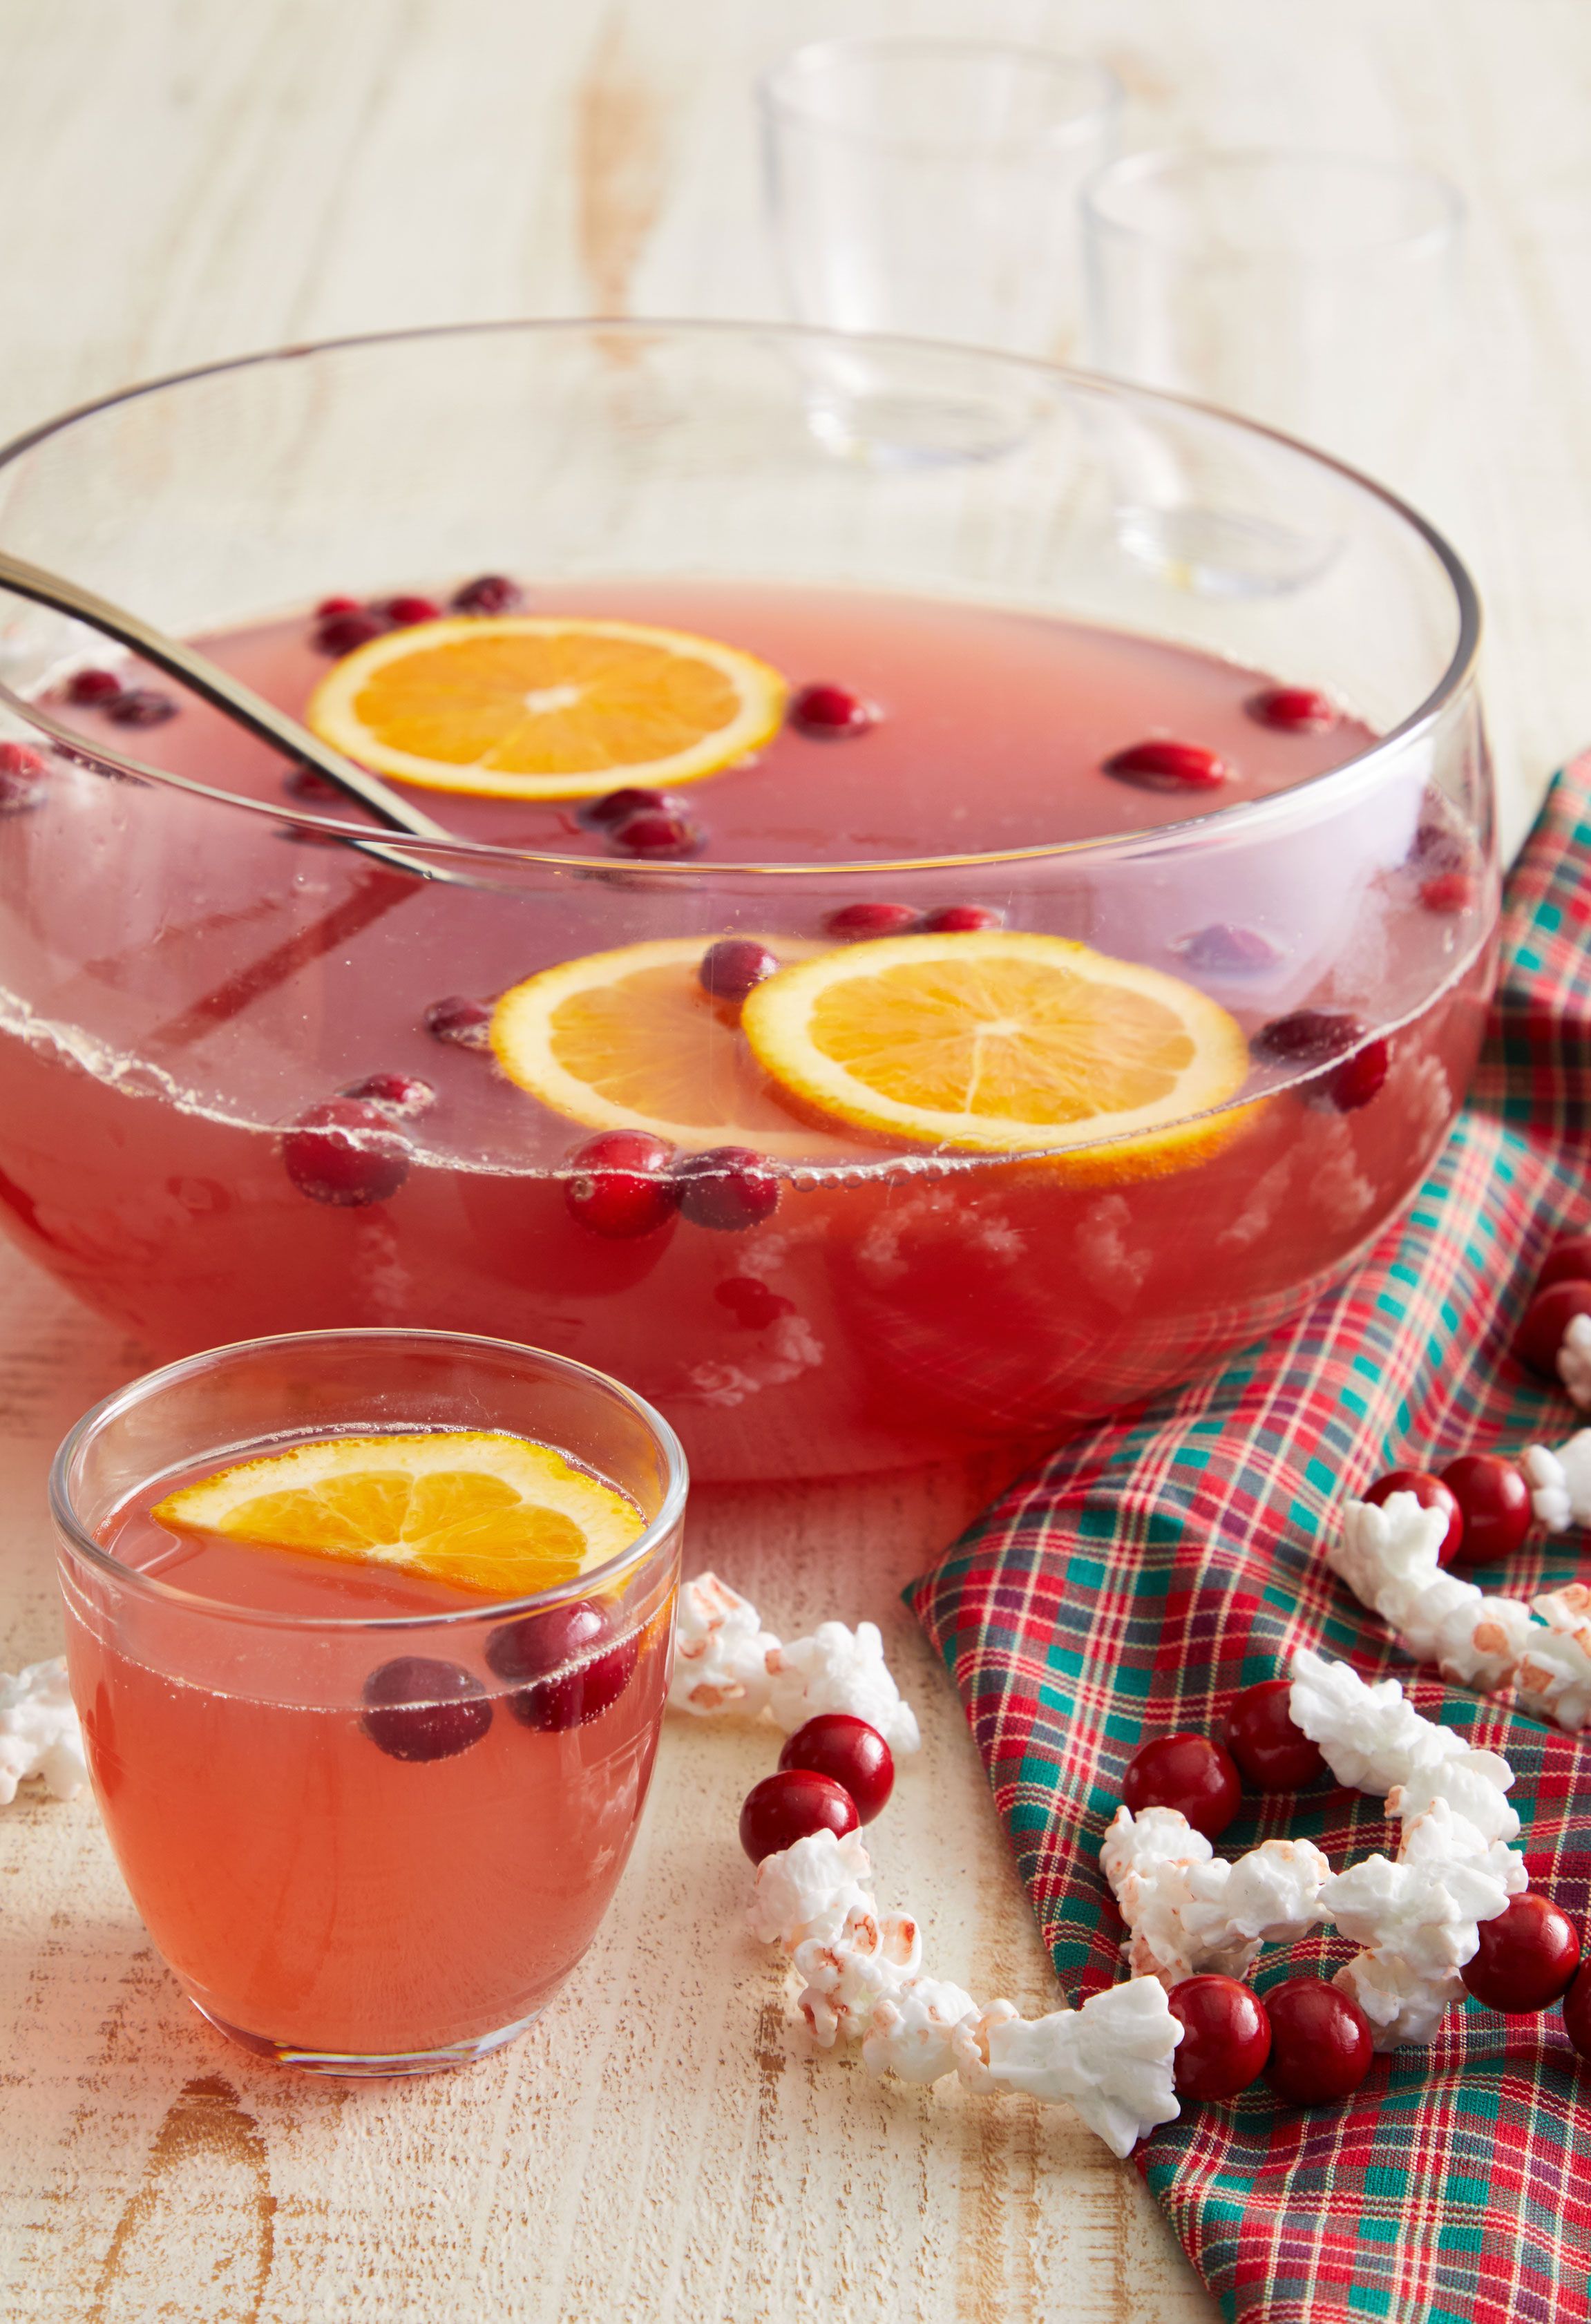 Fruity Punch Recipe - Great for Parties! - The Busy Baker